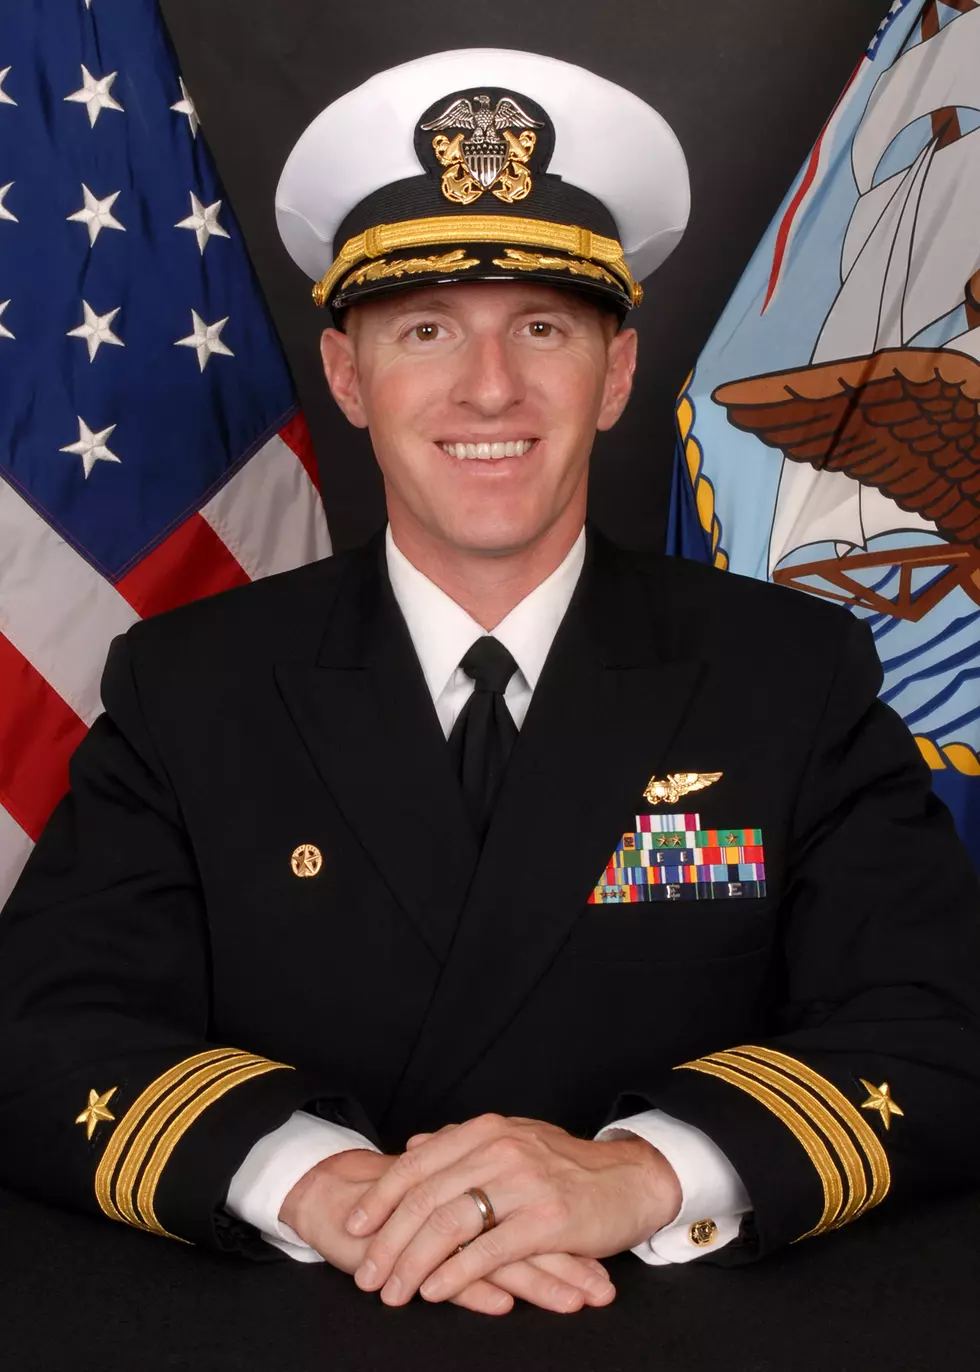 Cmdr. Michael Strauss of Toms River is our Warrior of the Week